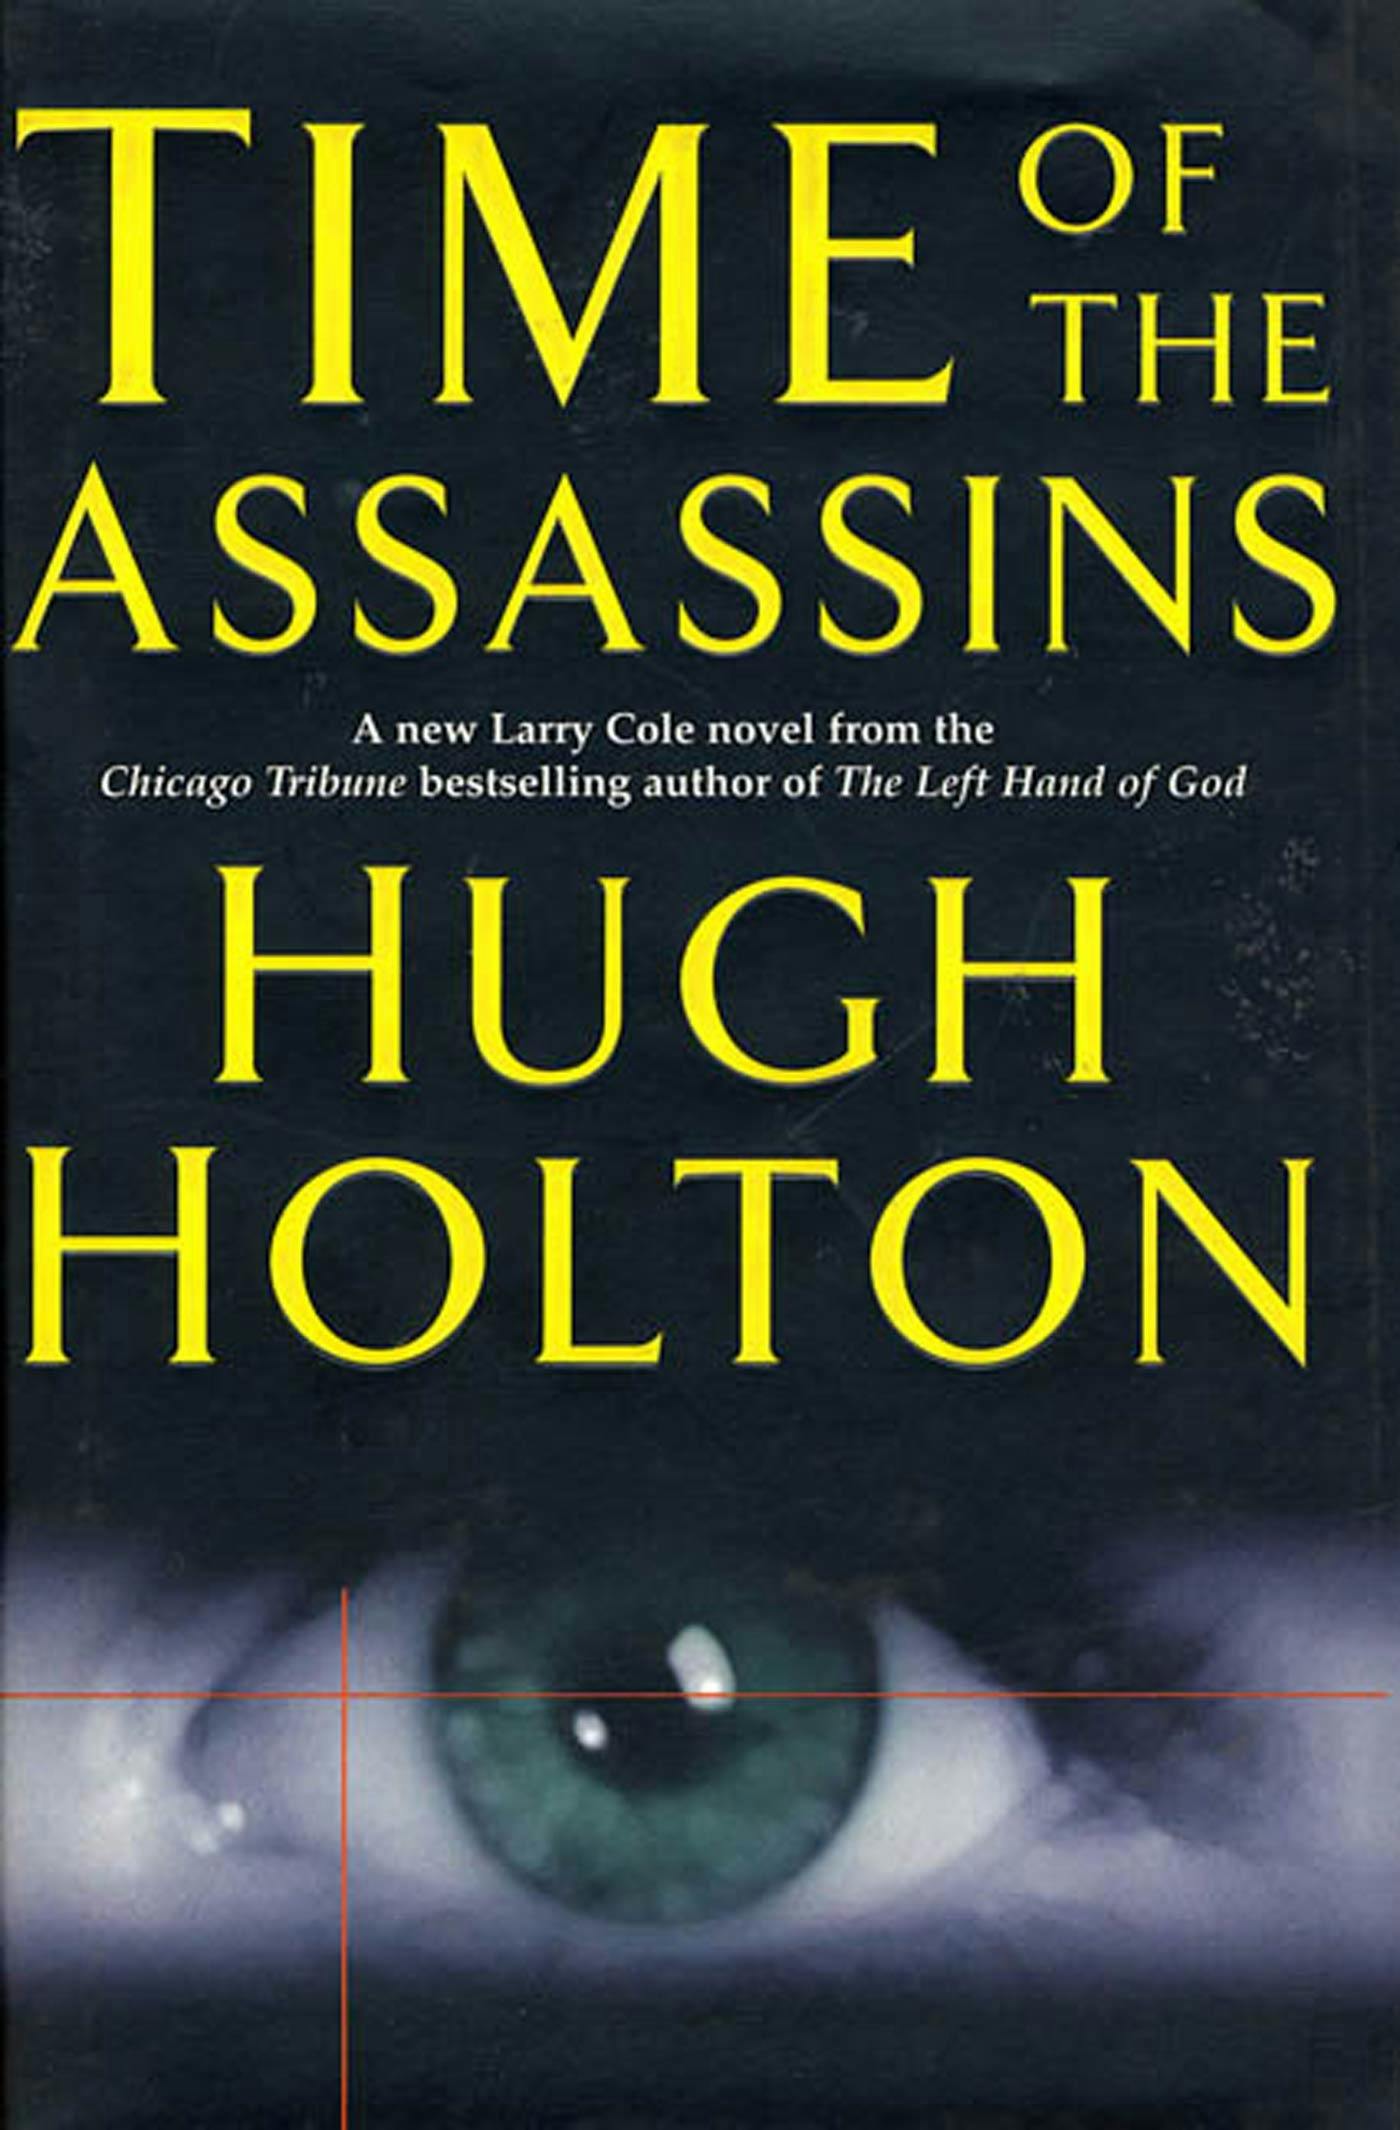 Cover for the book titled as: Time of the Assassins